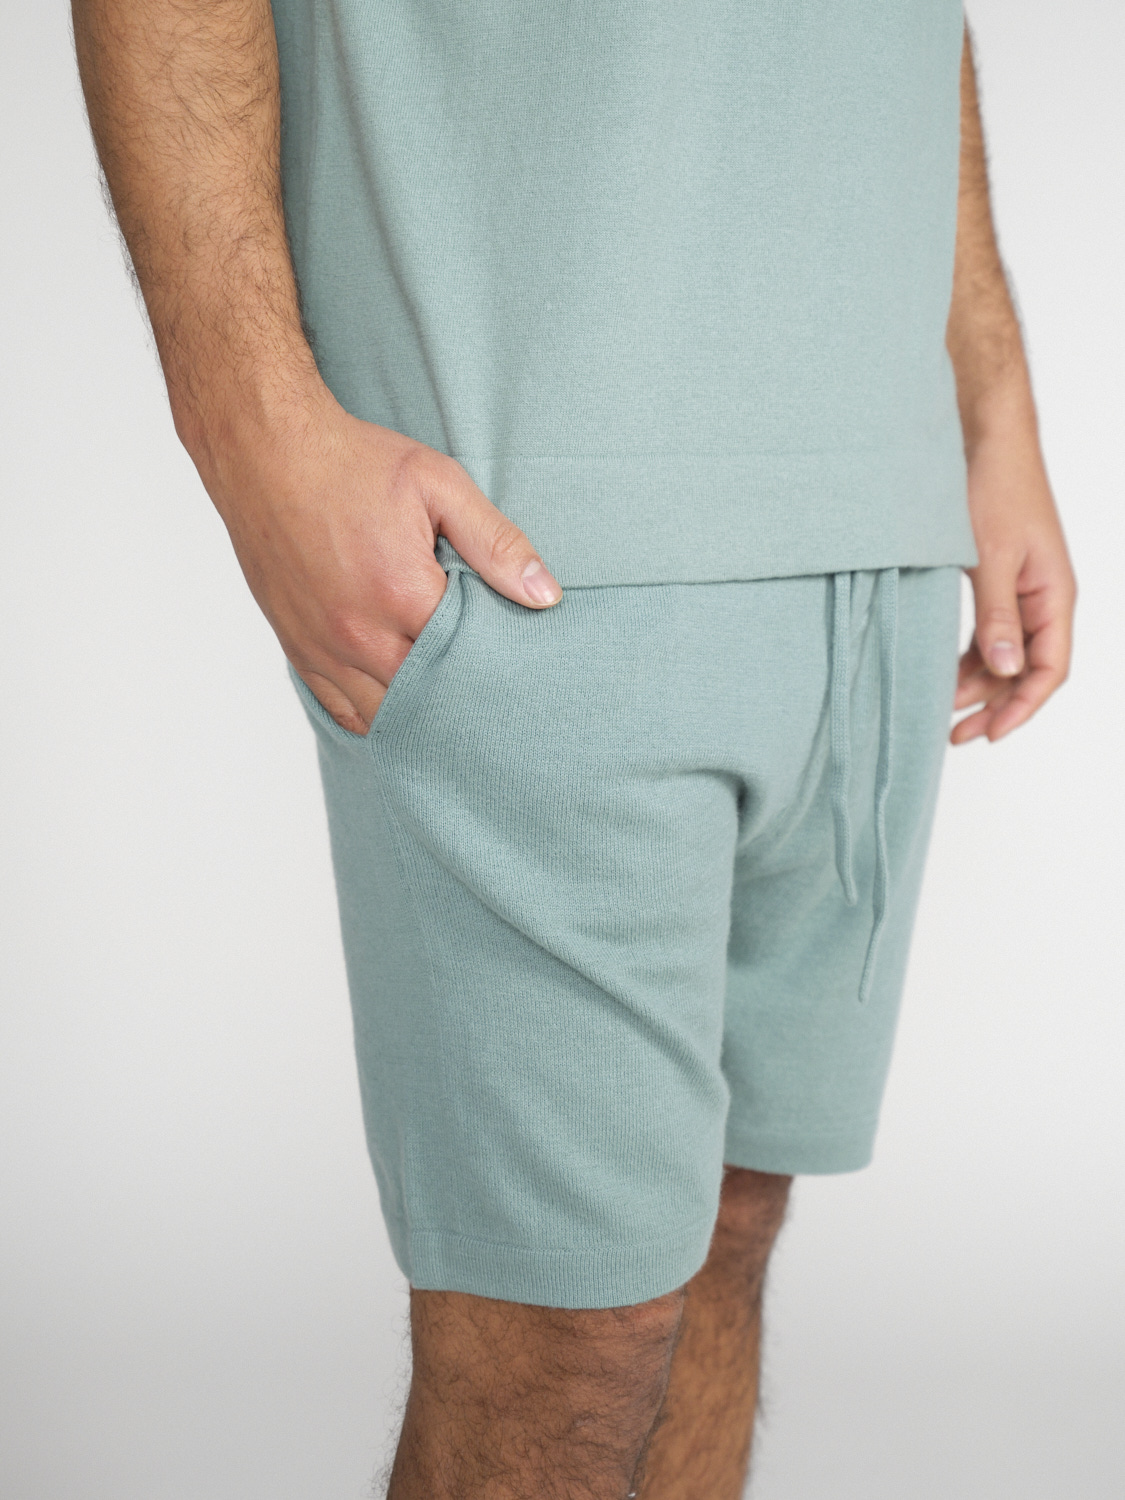 friendly hunting CC Hove -  Shorts made from a cotton-cashmere blend  mint L